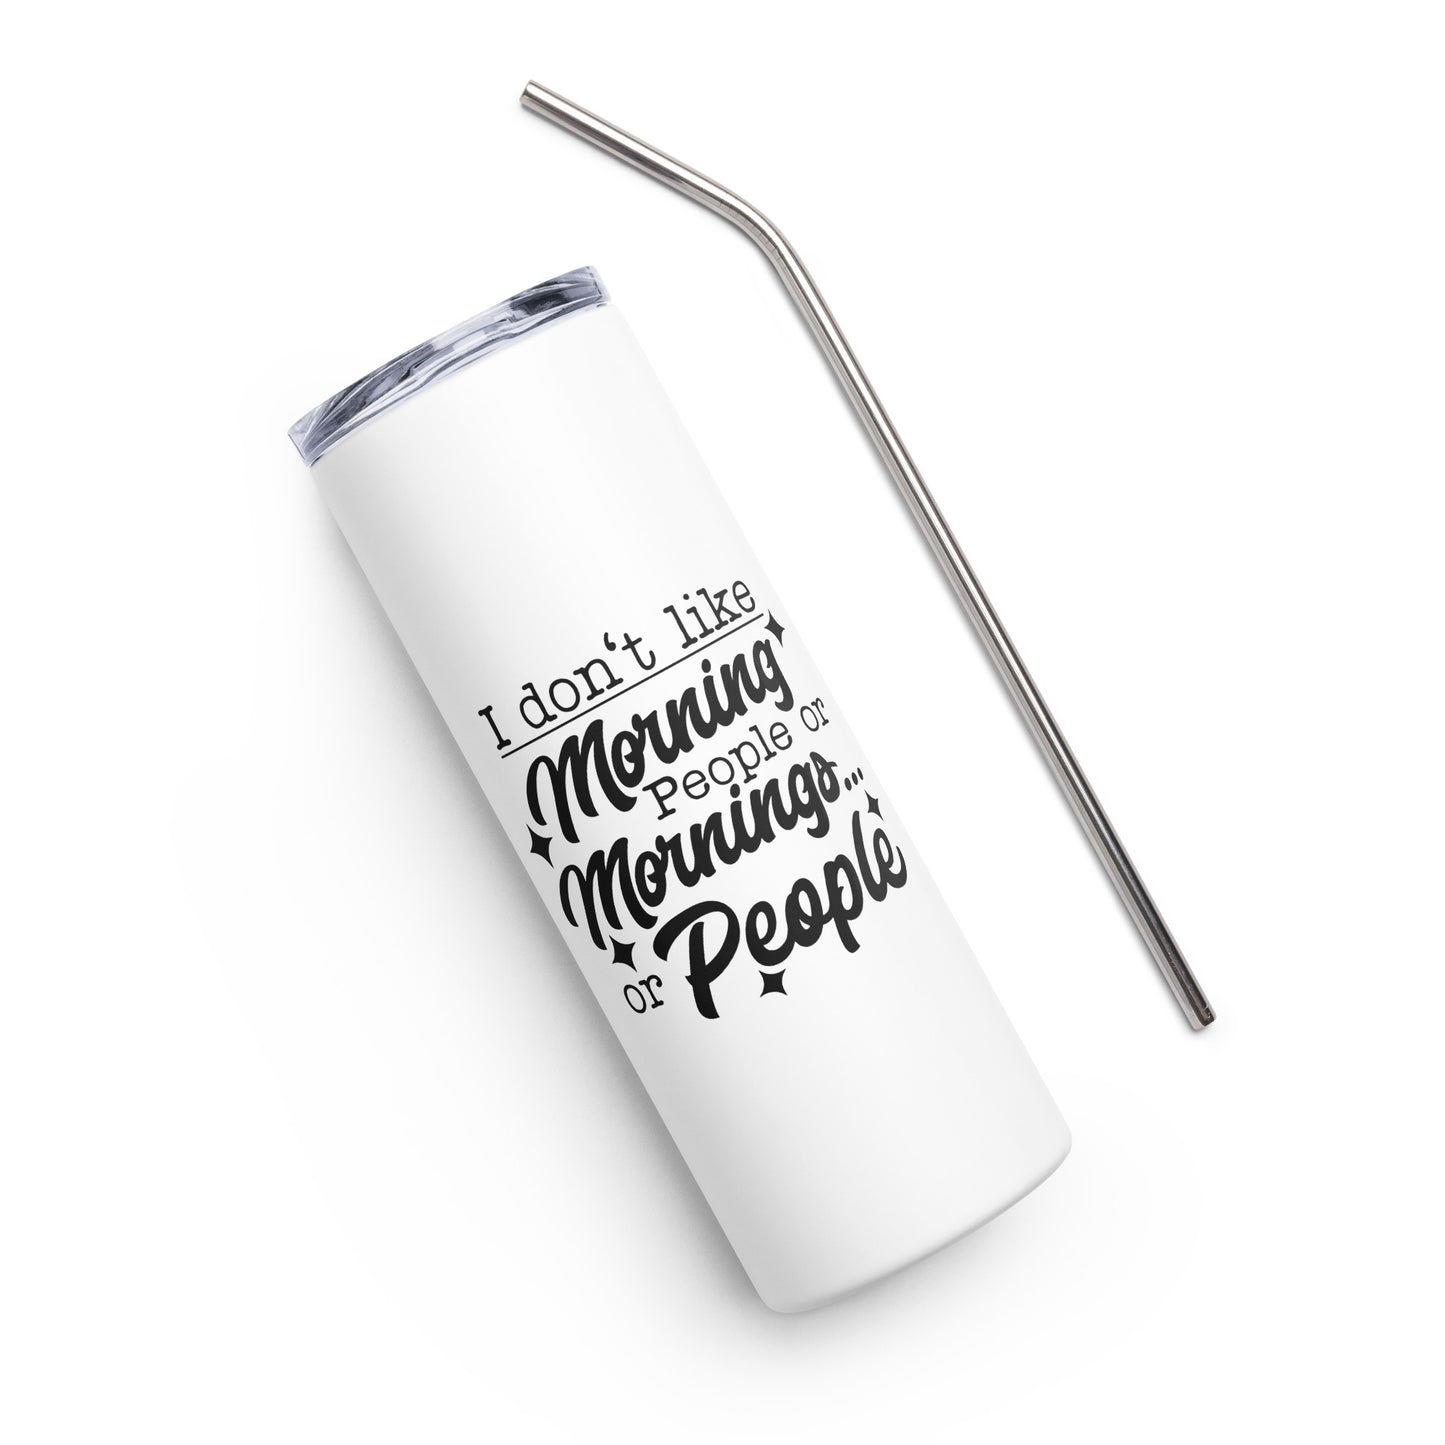 I Don't Like Morning People Stainless steel tumbler